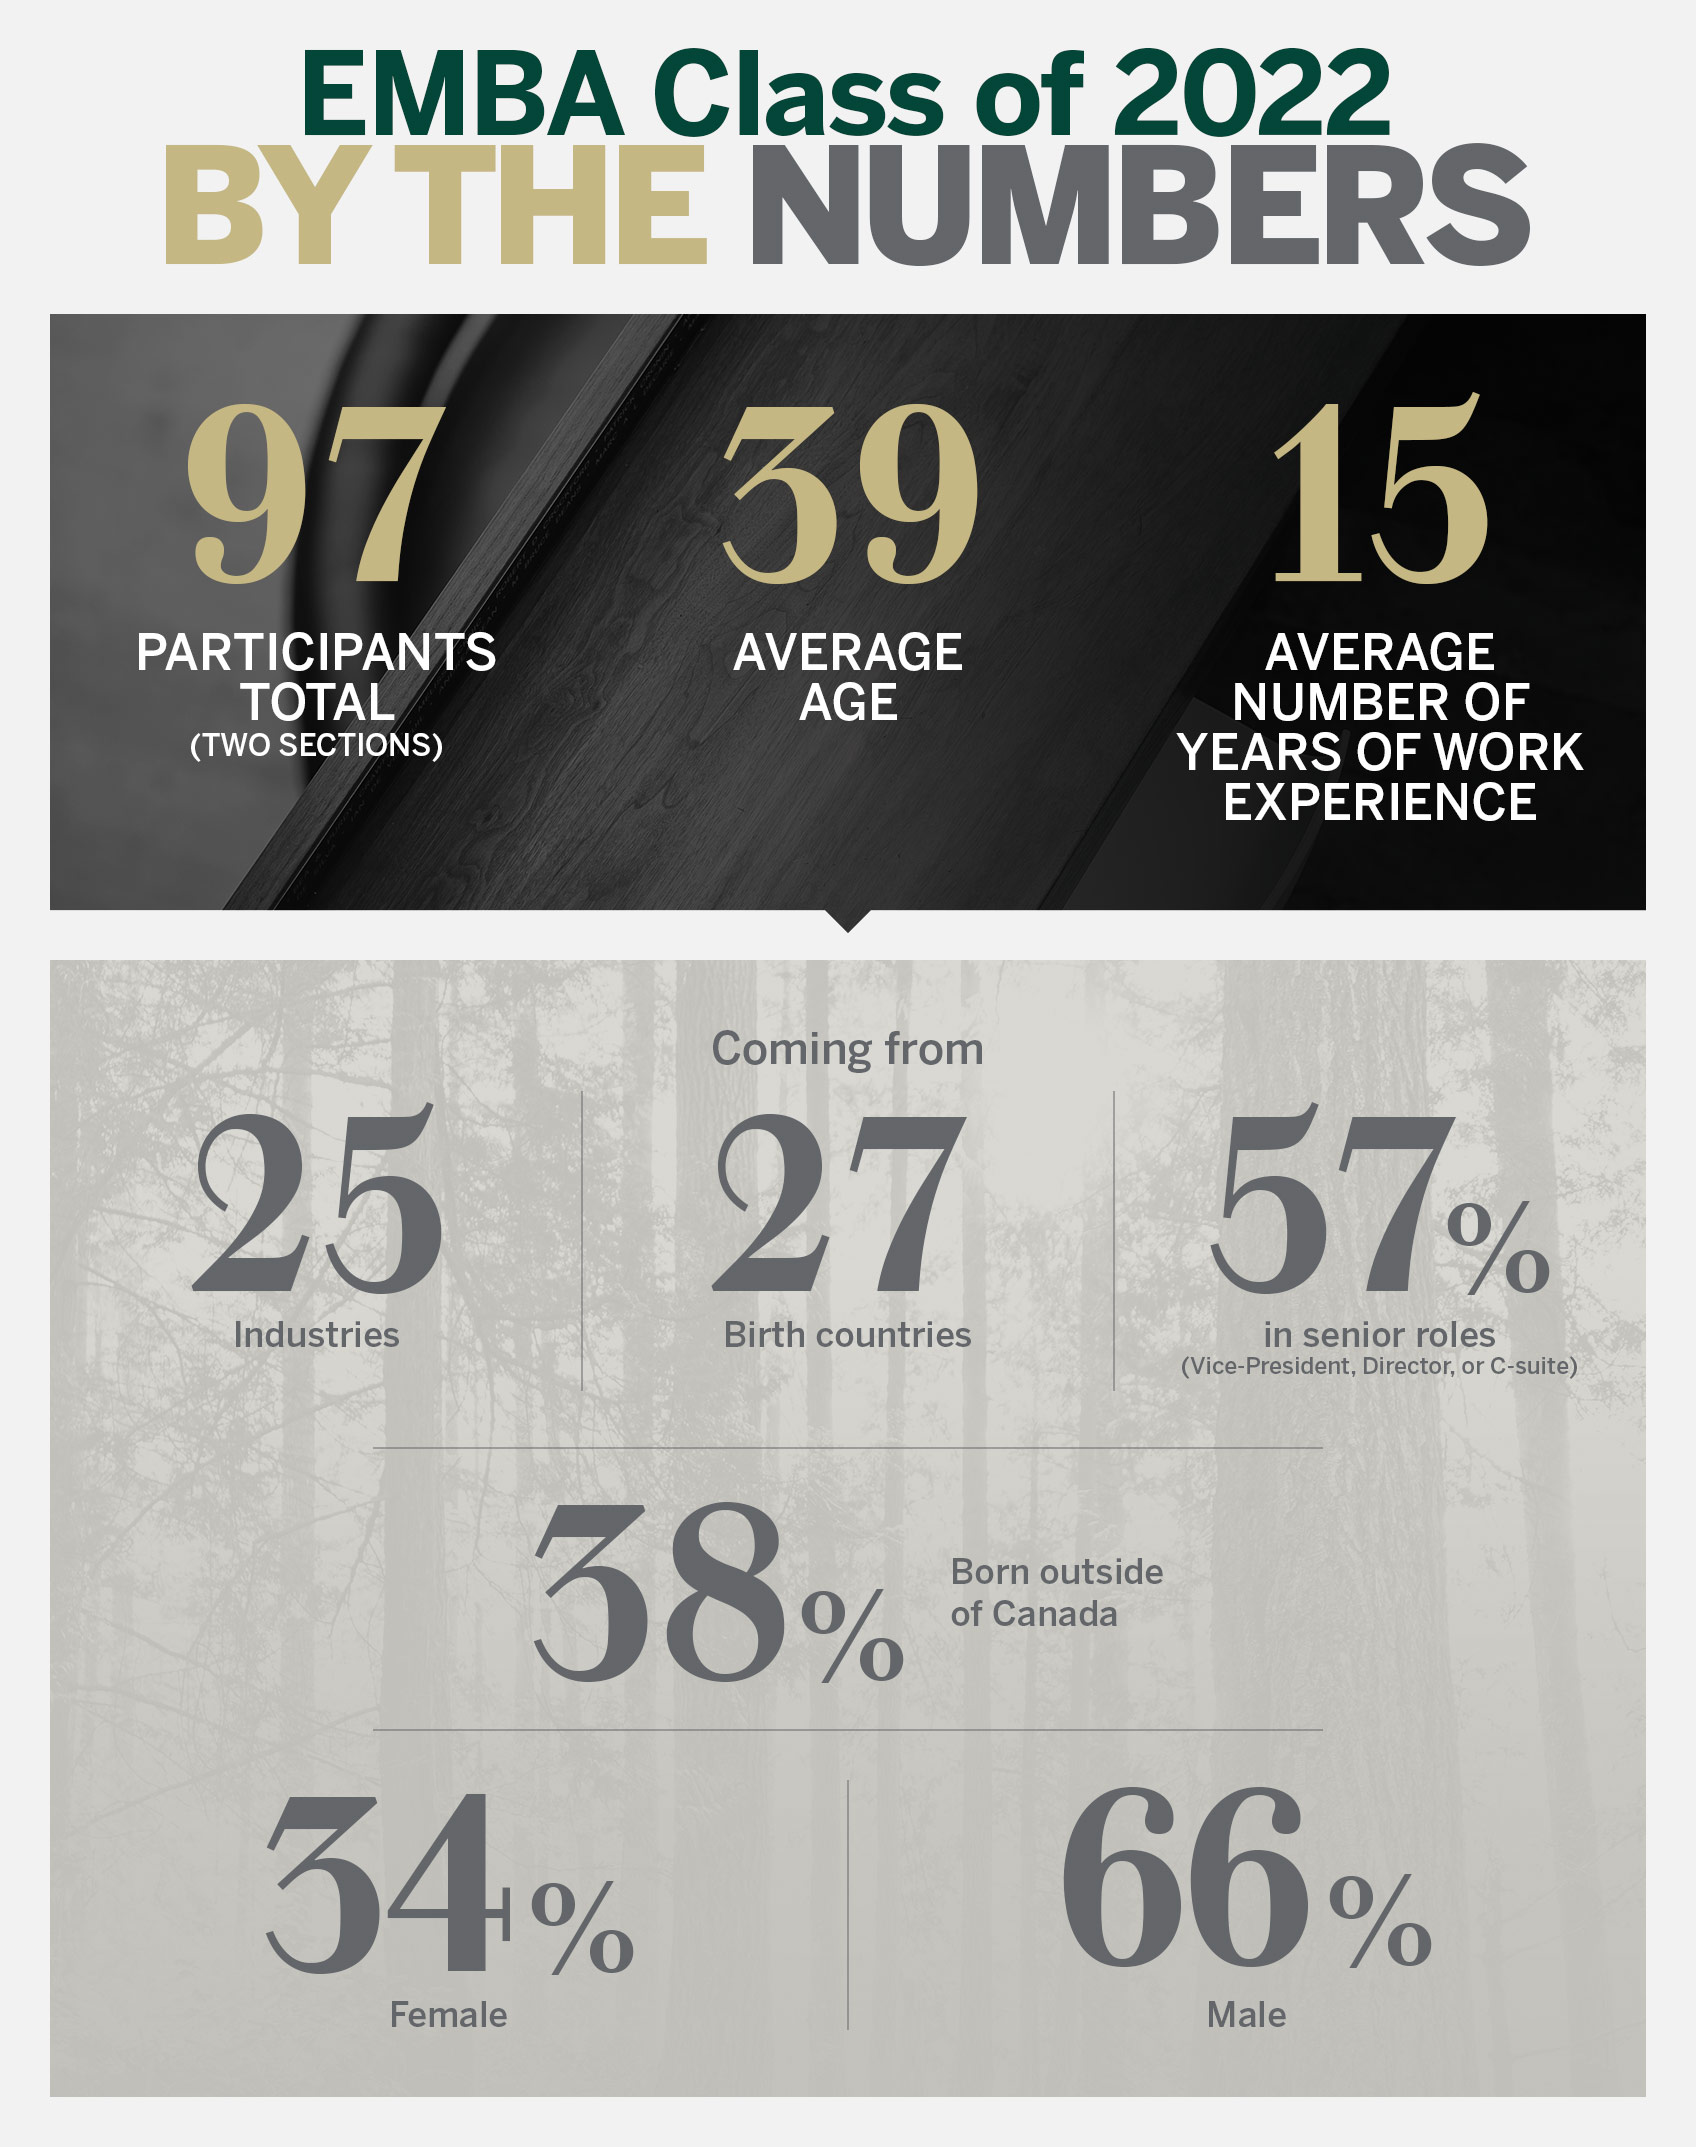 EMBA Class of 2022 By the Numbers